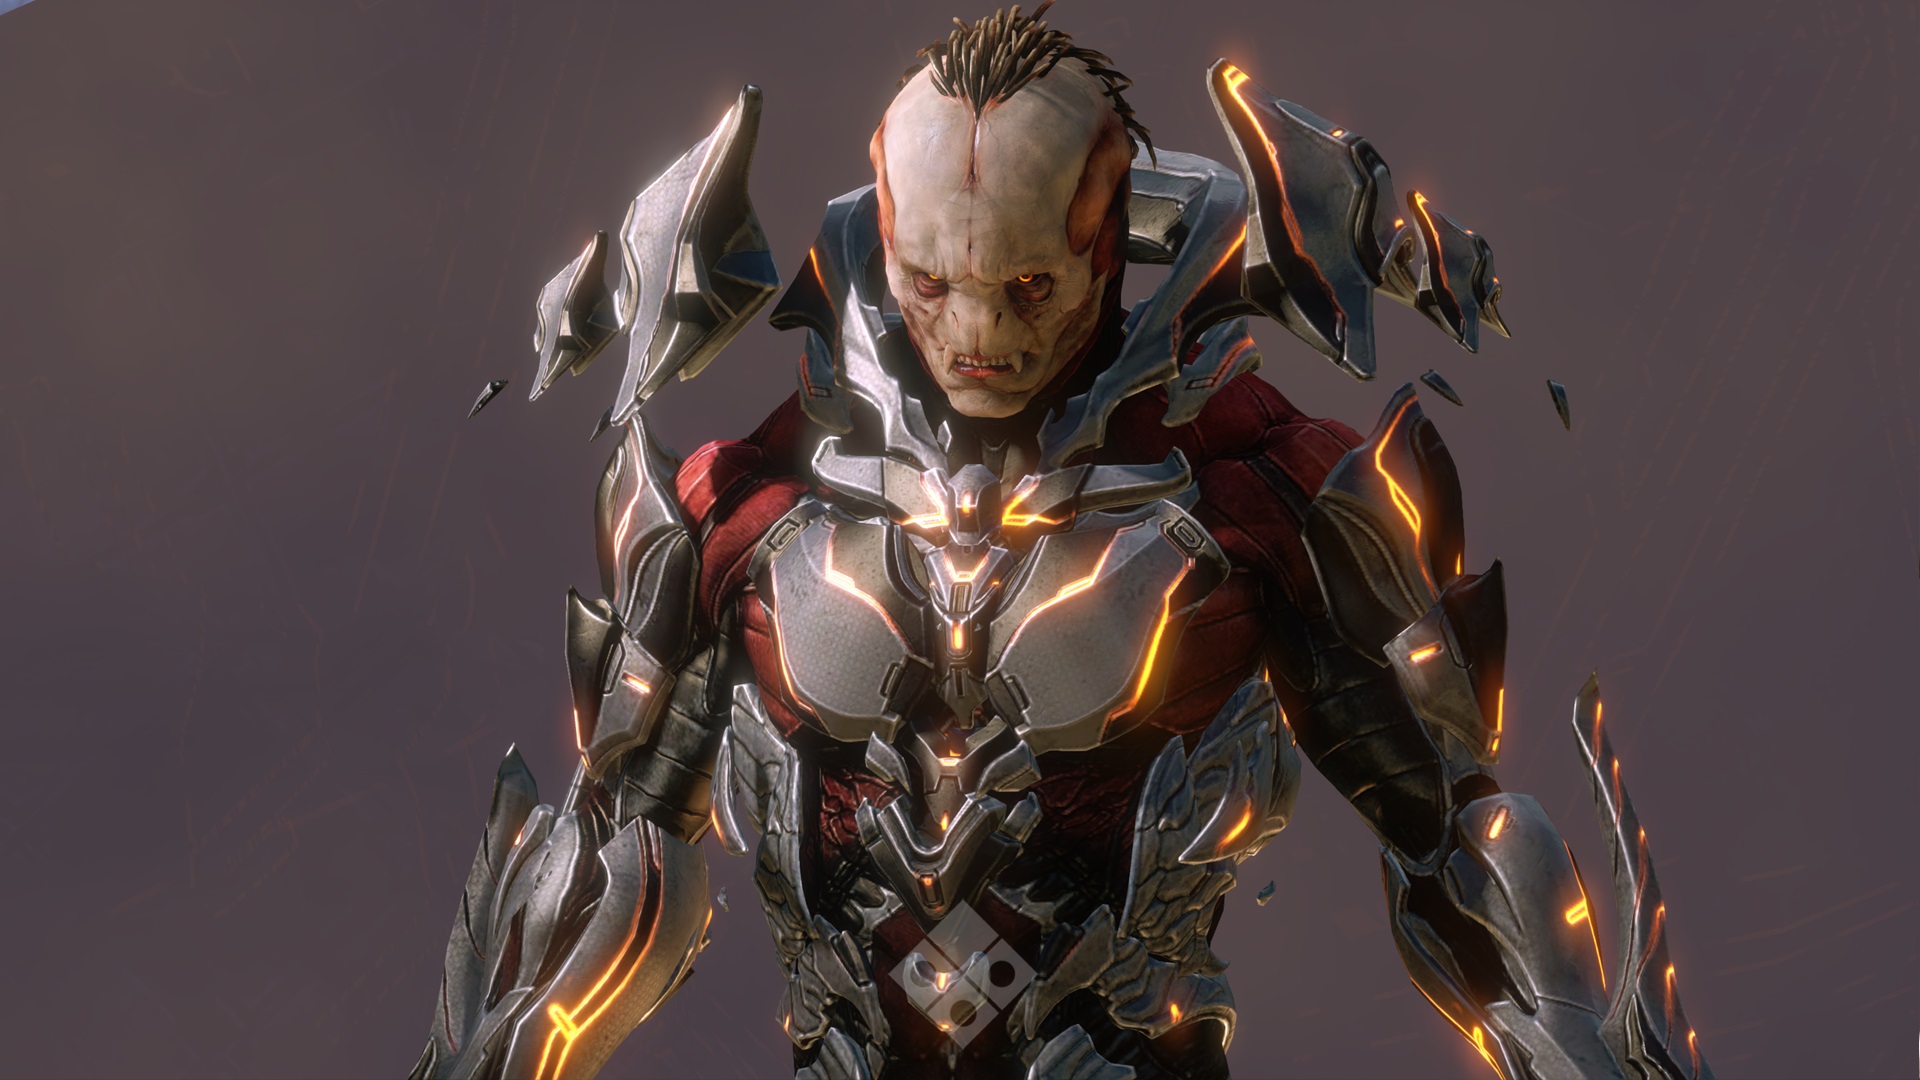 Canon Fodder header image showing a screenshot of the Didact in Halo 4